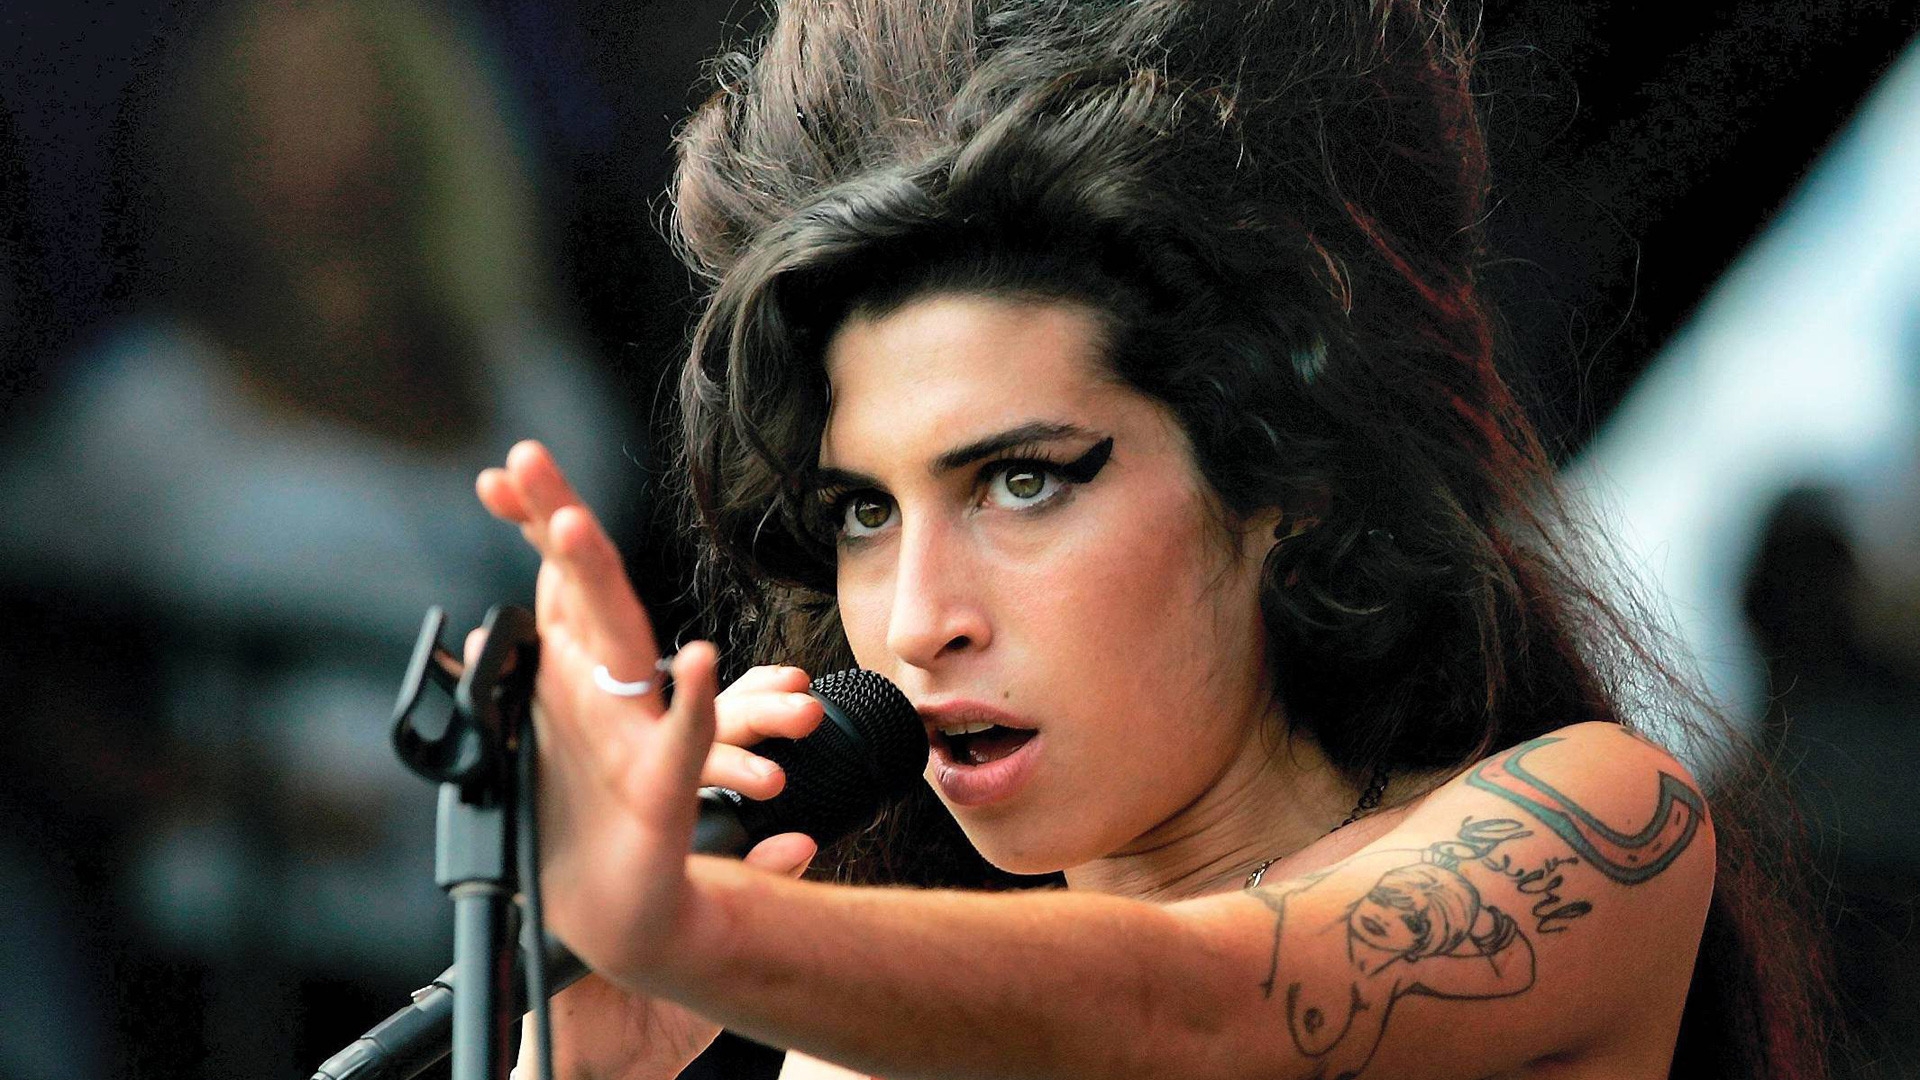 Amy Winehouse Singing for 1920 x 1080 HDTV 1080p resolution